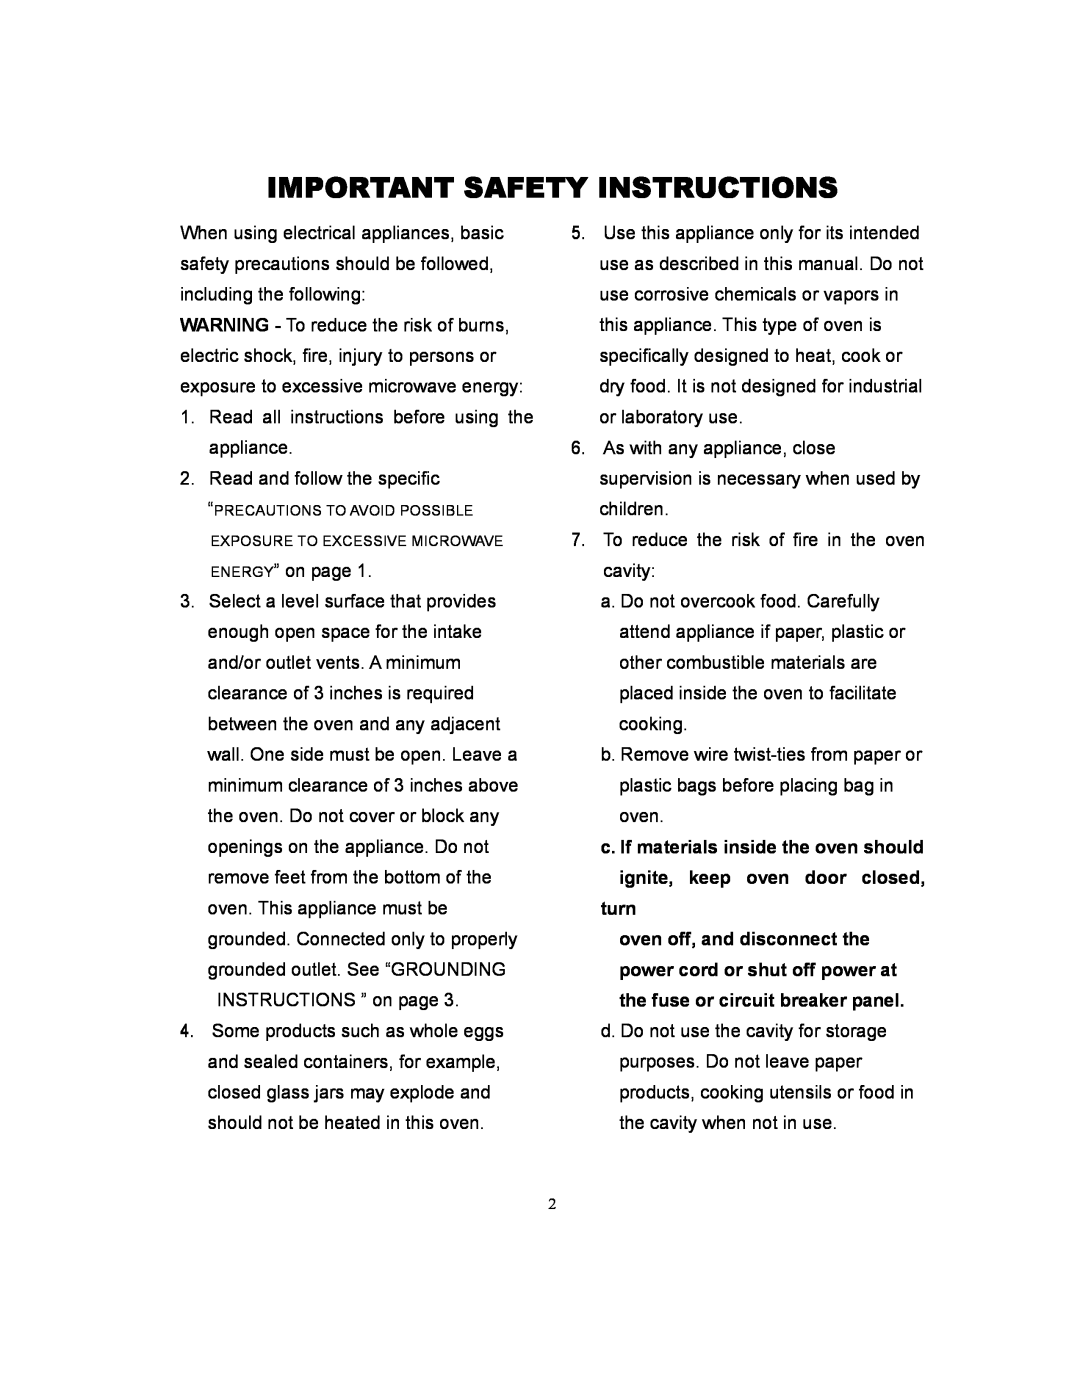 Sunbeam SMW978 Important Safety Instructions, c.If materials inside the oven should, ignite, keep oven door closed, turn 